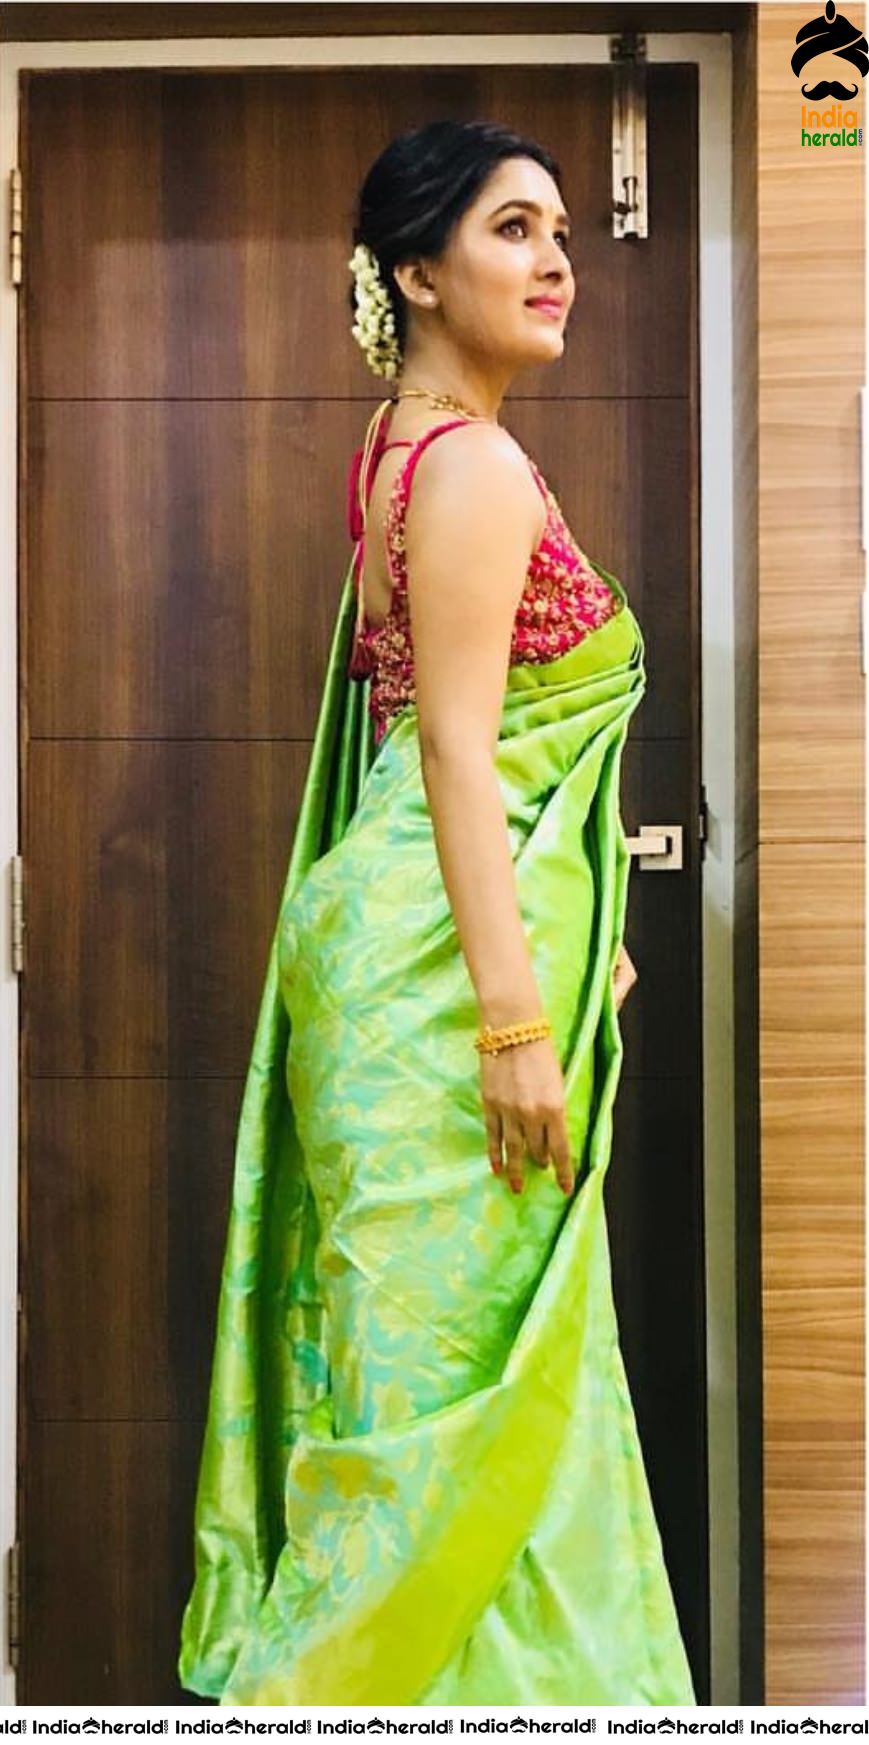 Vani Bhojan looking Vivacious and Sexy in these Hot Saree and Backless Blouse photos photo